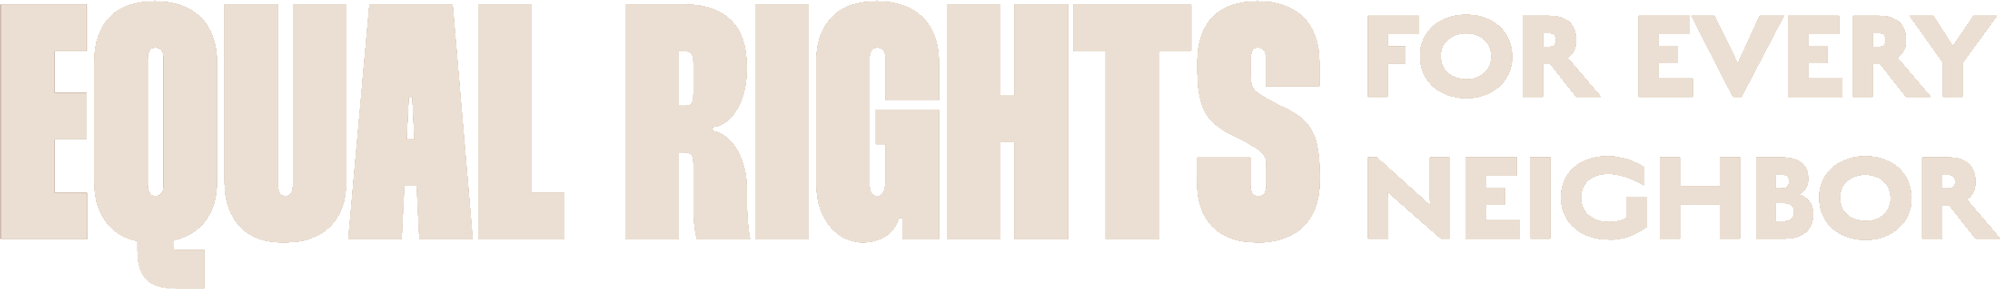 Equal Rights for Every Neighbor logo in light beige color